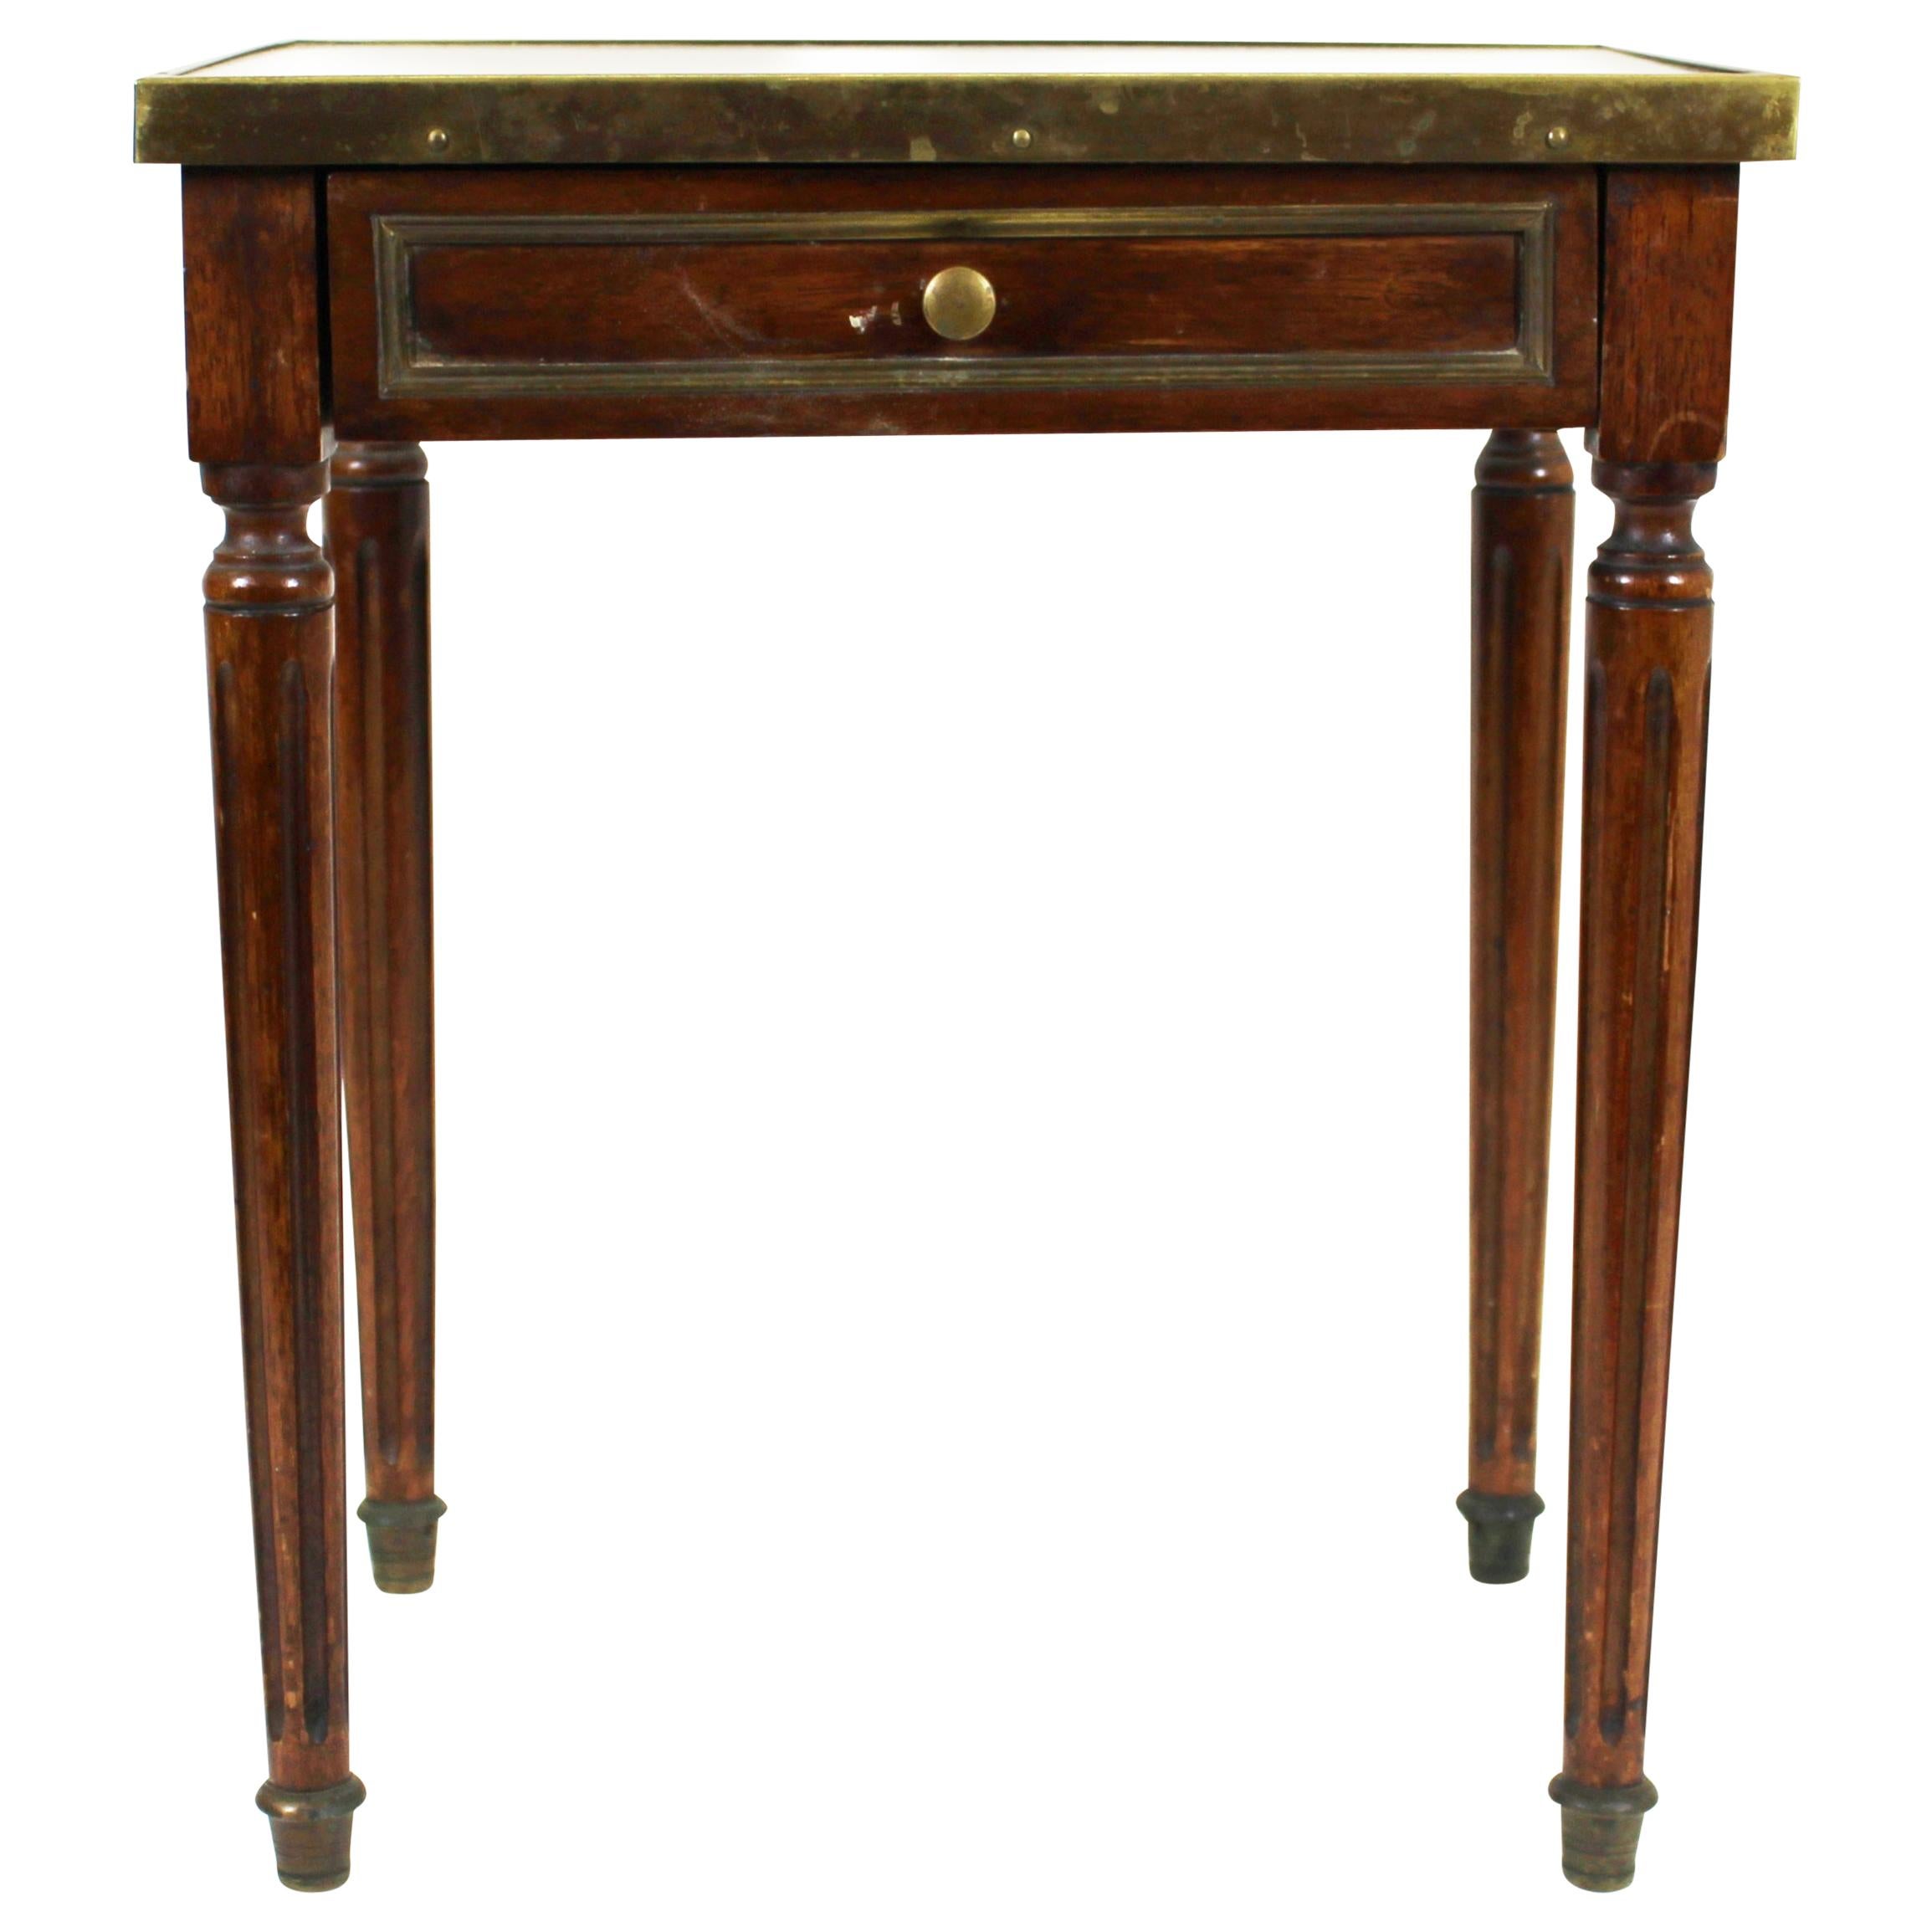 Continental Diminutive Marble Top Side Table with Drawer